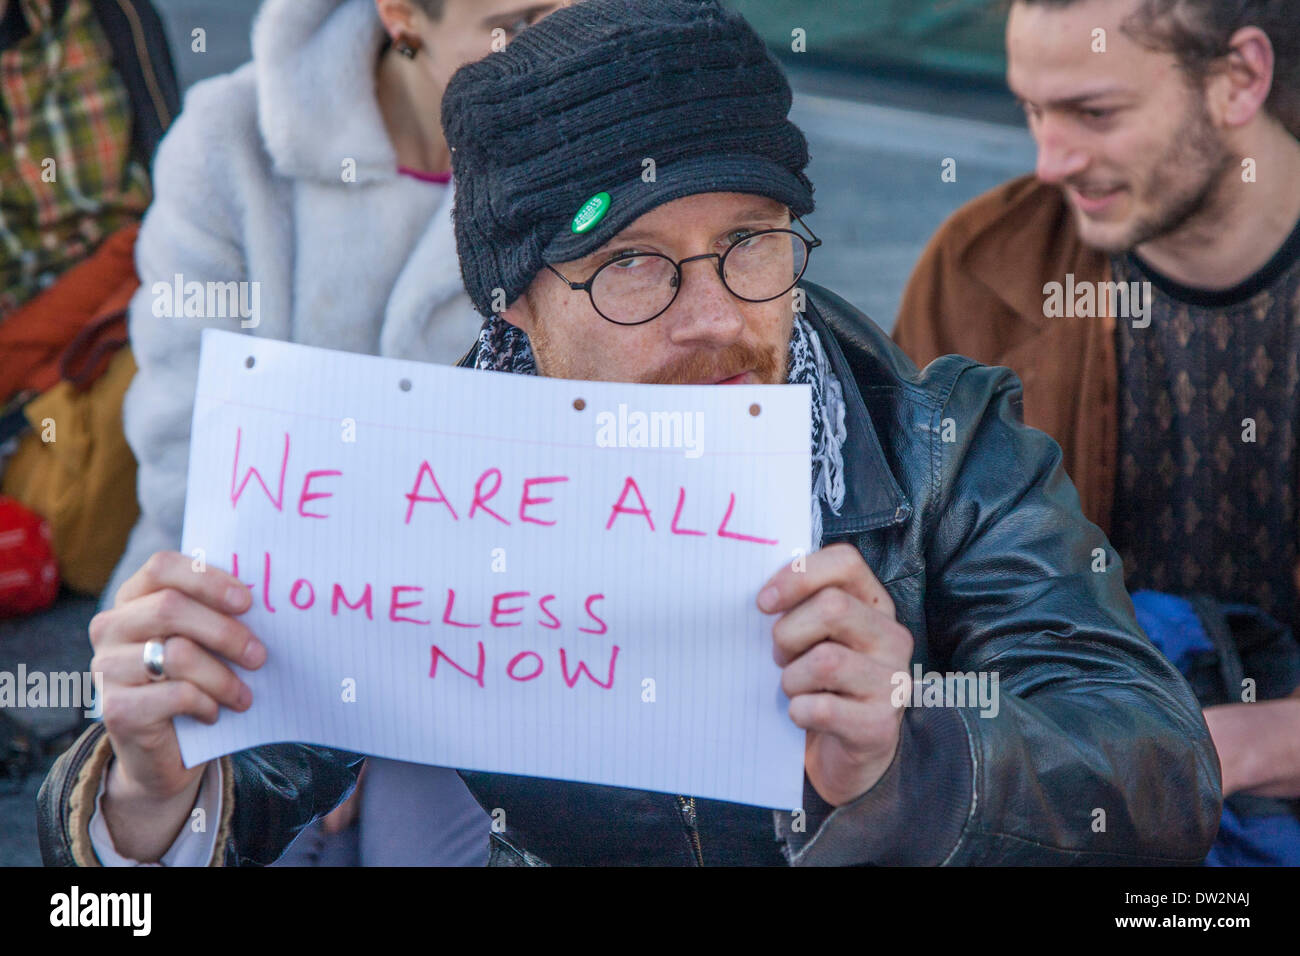 London, February 26th 2014. A small group of demonstrators protest against the 'criminalisation of the homeless' outside City Hall during the Mayor's Question Time. Credit:  Paul Davey/Alamy Live News Stock Photo